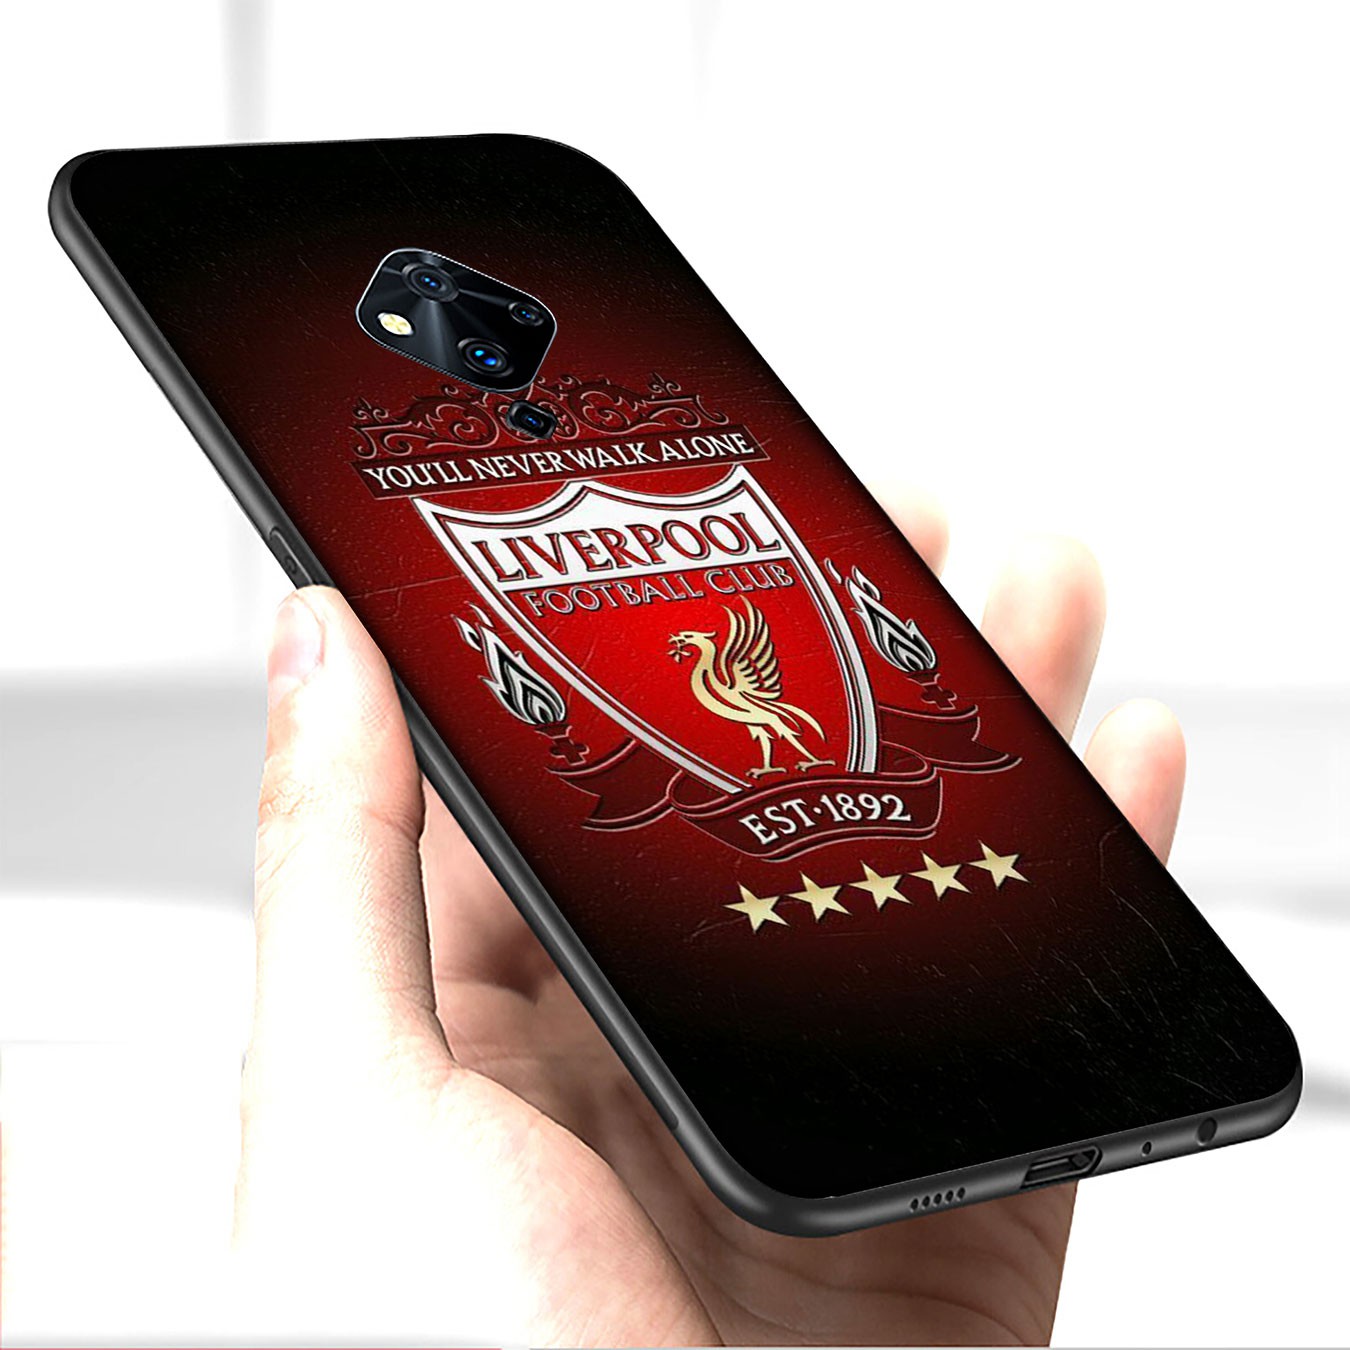 Samsung Galaxy S21 Ultra S8 Plus F62 M62 A2 A32 A52 A72 S21+ S8+ S21Plus Casing Soft Silicone Liverpool Football logo Phone Case